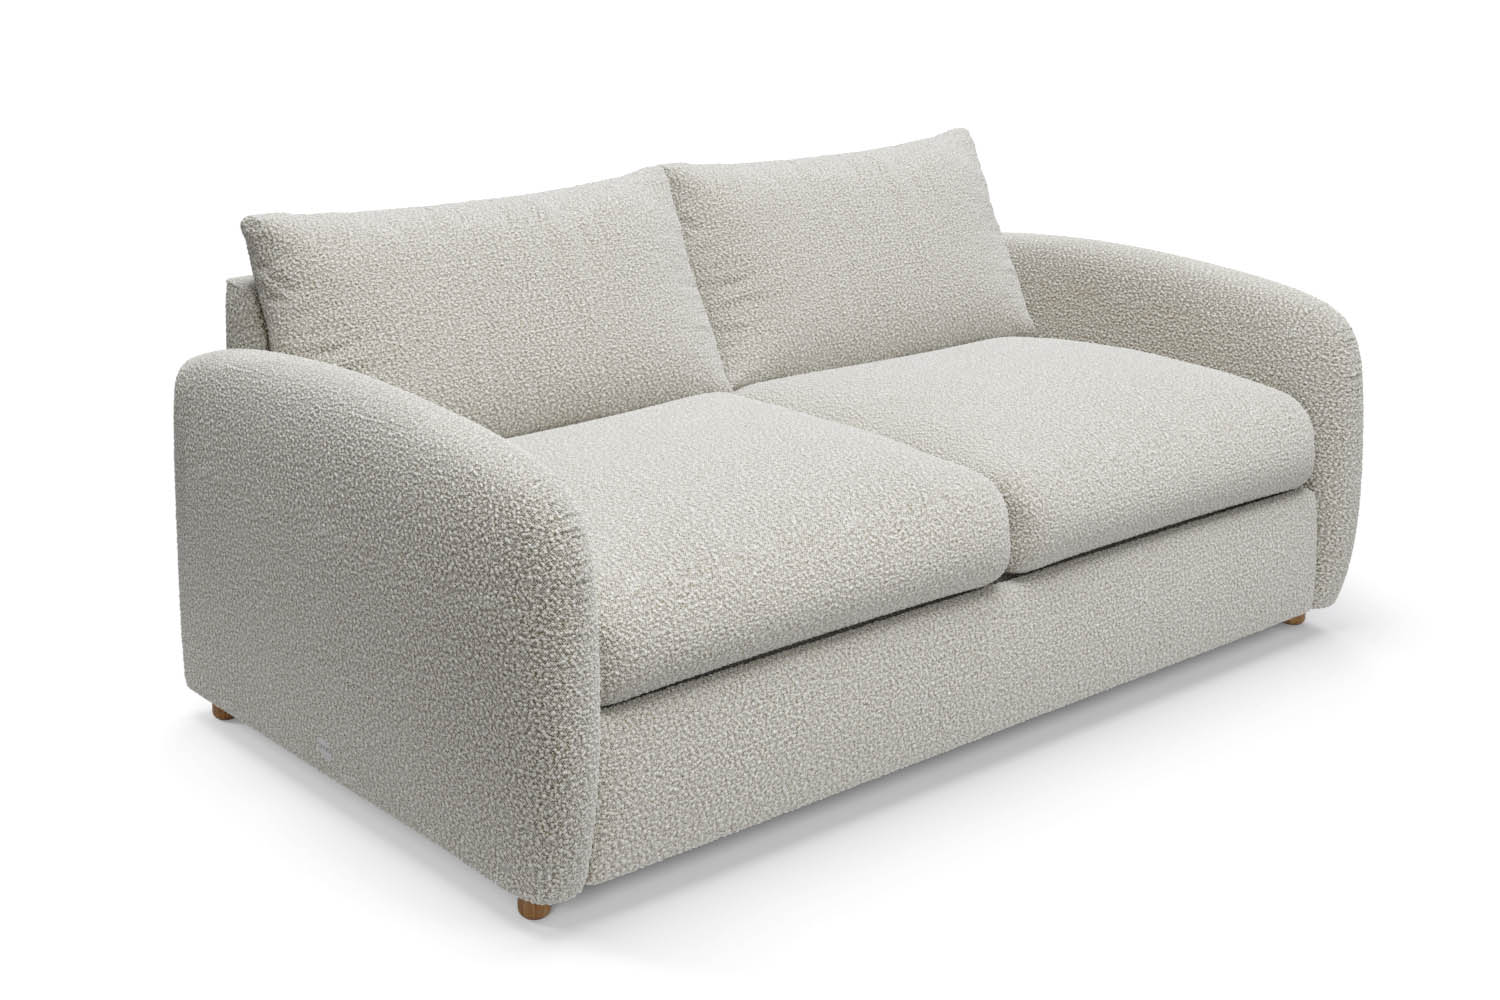 The Small Biggie - 3 Seater Sofa Bed - Fuzzy White Boucle